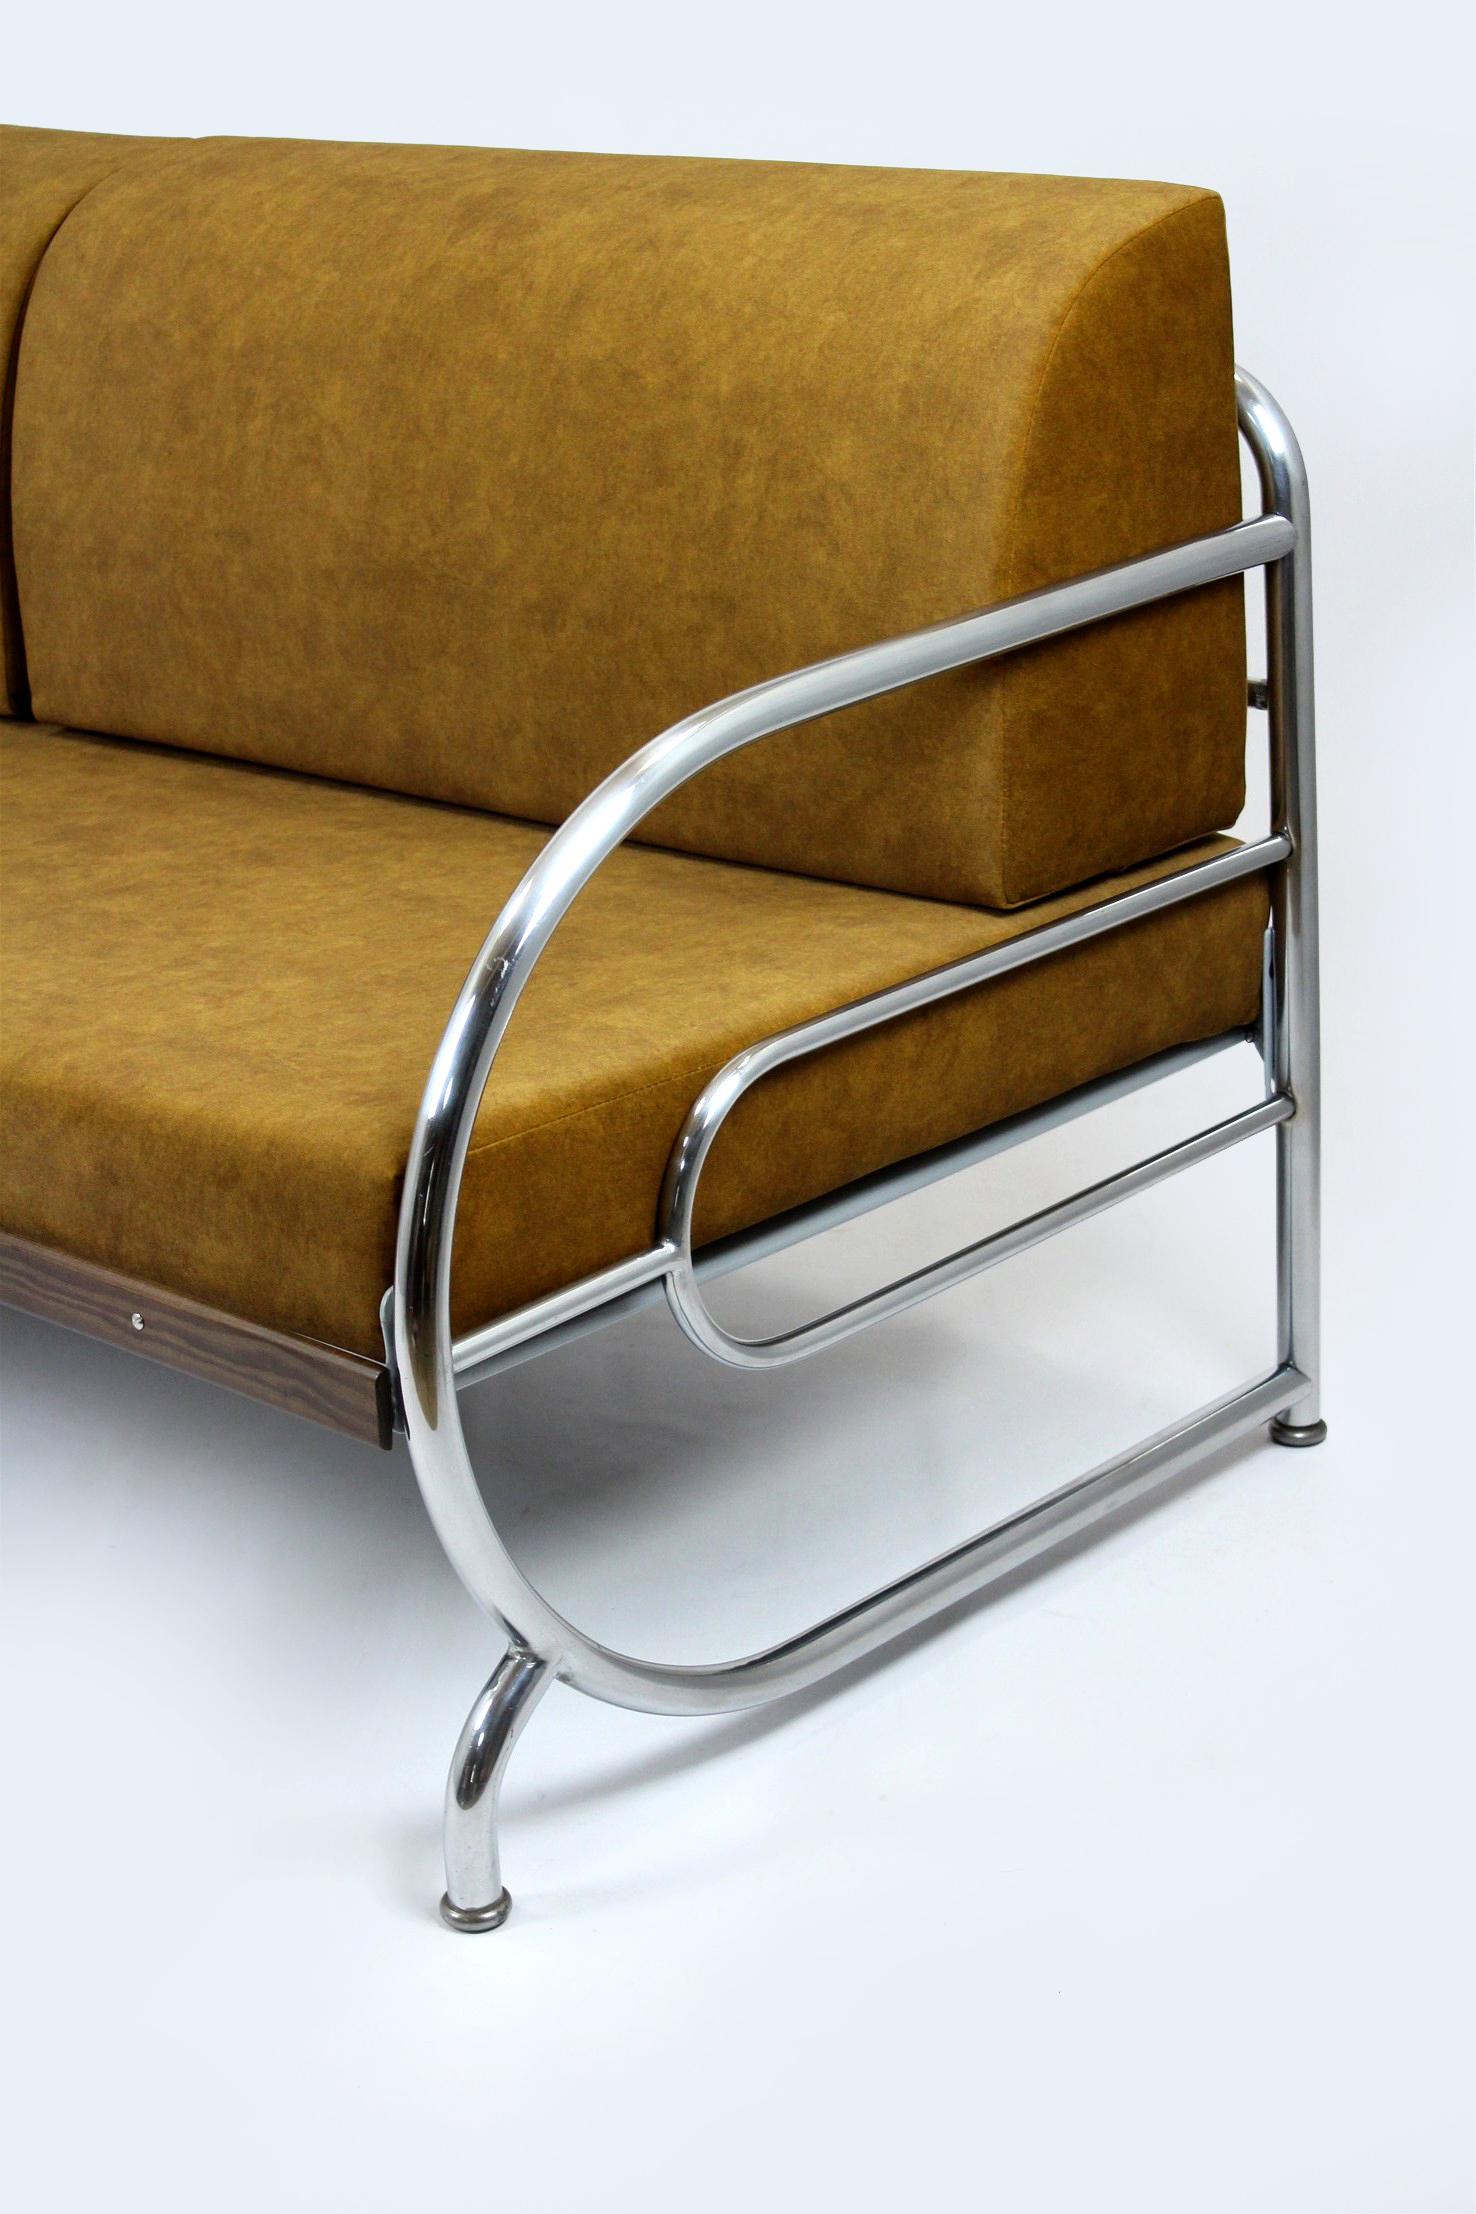 Restored Bauhaus Tubular Chrome Steel Sofa from Hynek Gottwald, 1930s In Good Condition For Sale In Żory, PL